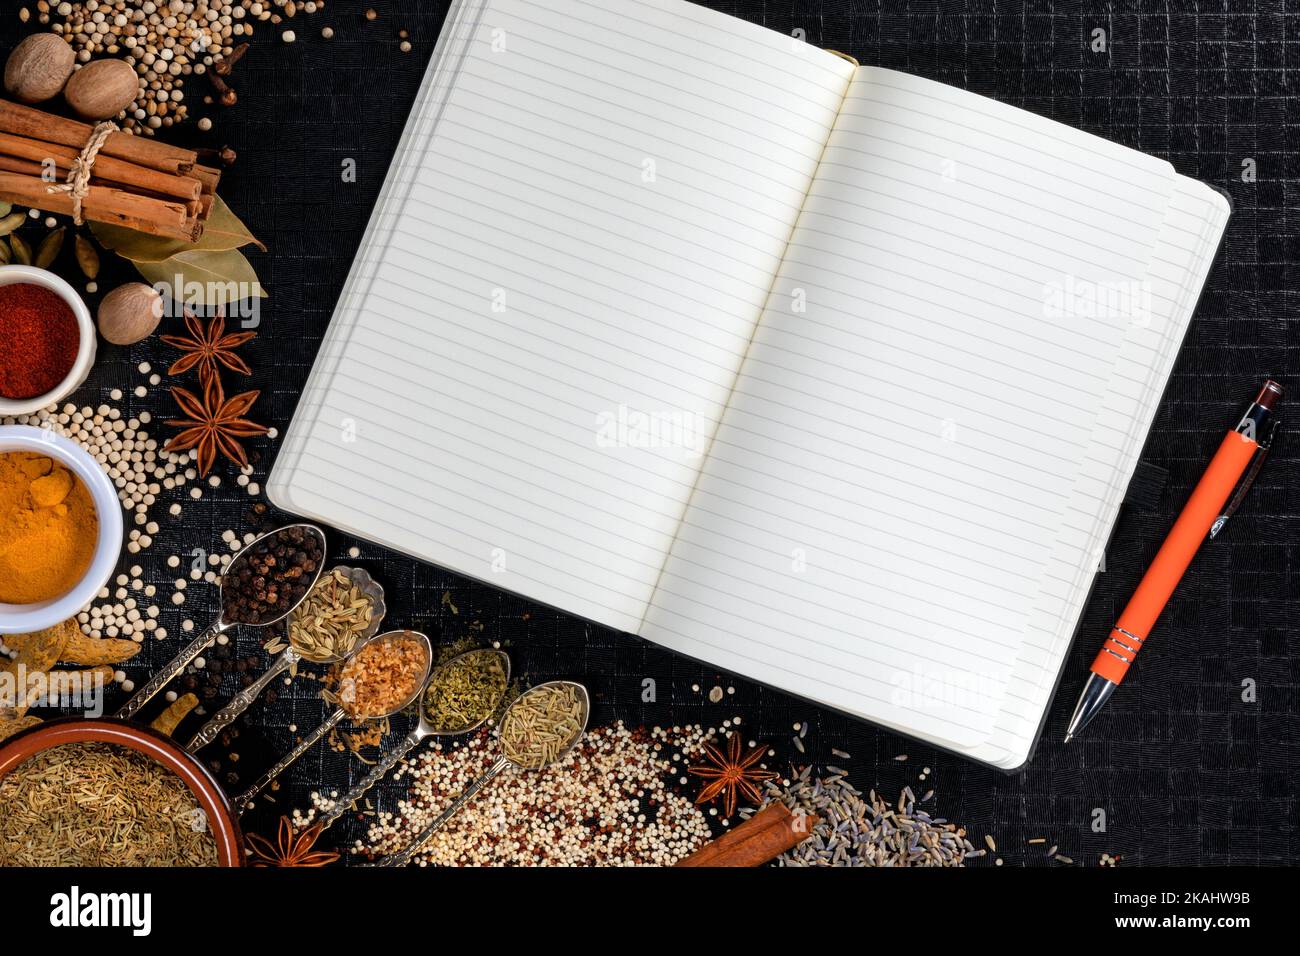 Cooking spices used to add flavor and seasoning with an open recipe book with blank pages - space for text. Stock Photo